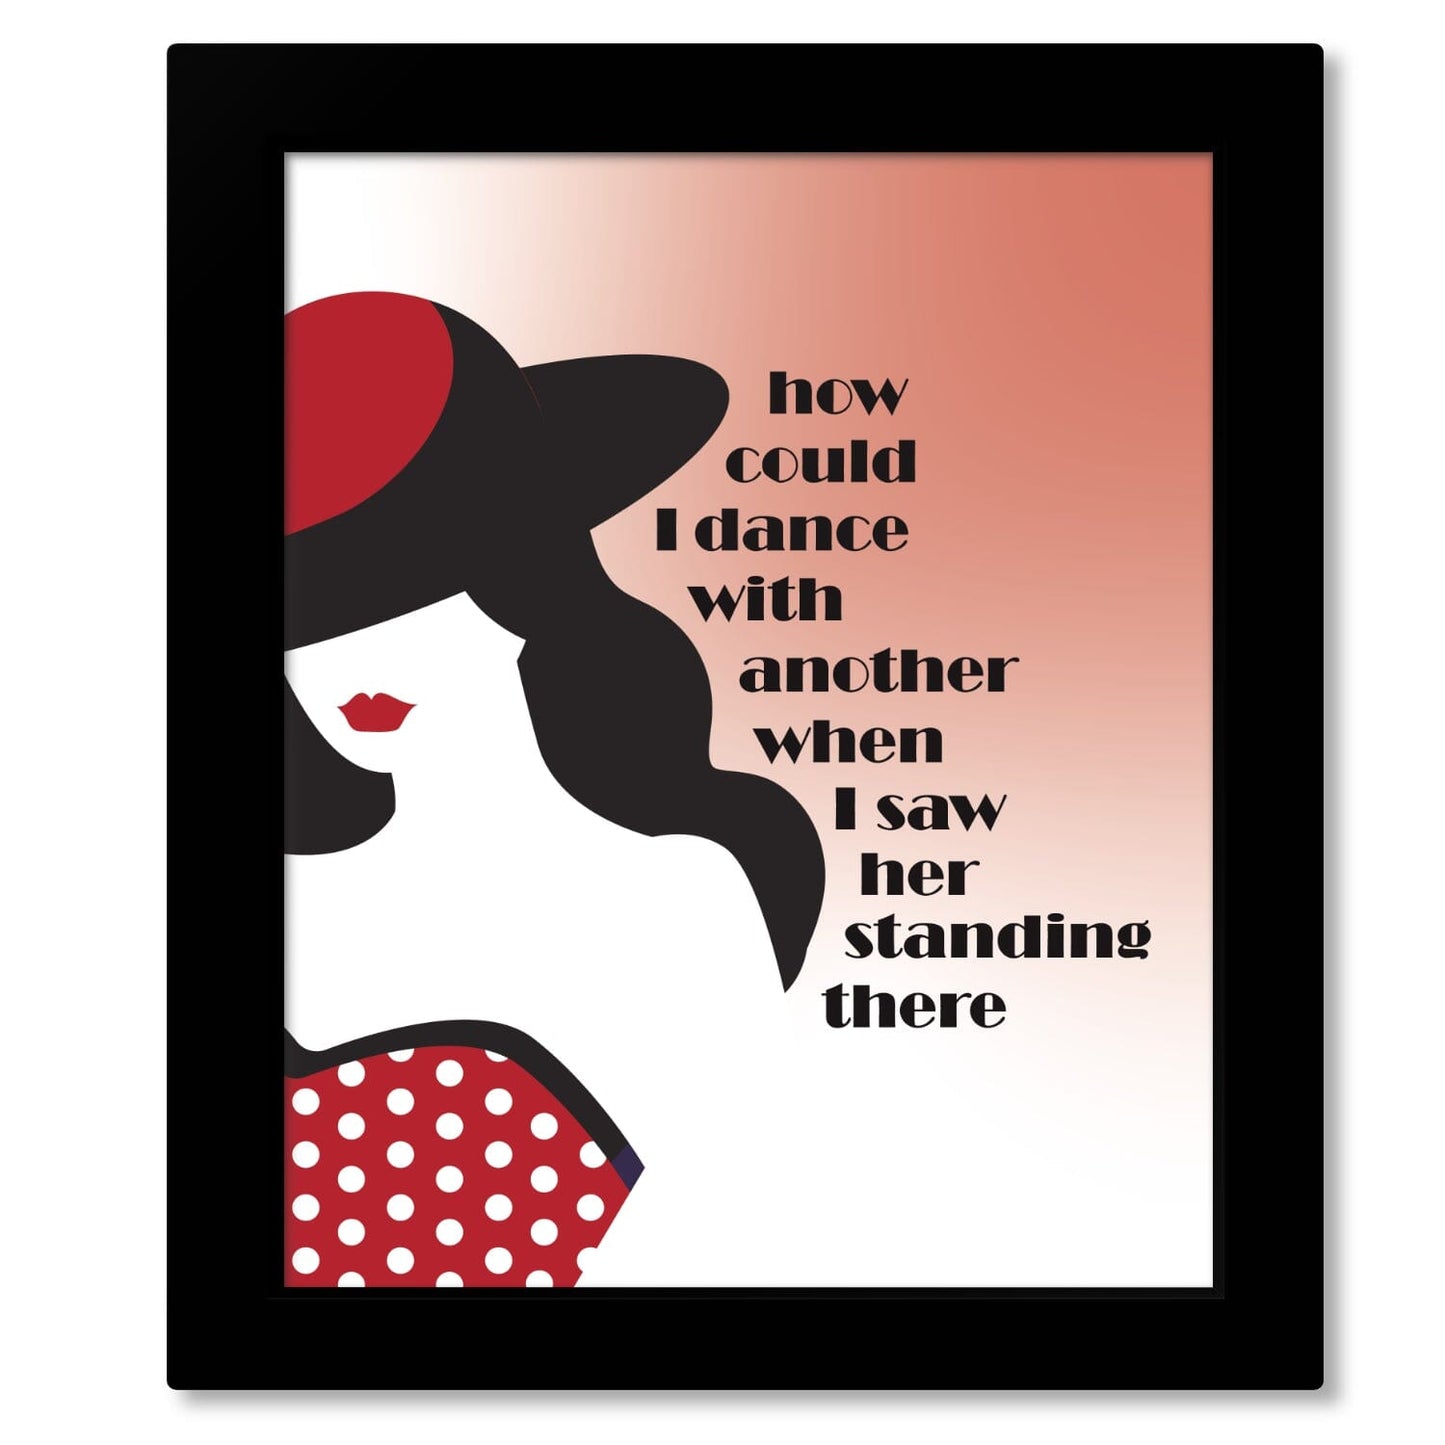 I Saw Her Standing There by the Beatles - Song Lyrics Print Song Lyrics Art Song Lyrics Art 8x10 Framed Print (without mat) 